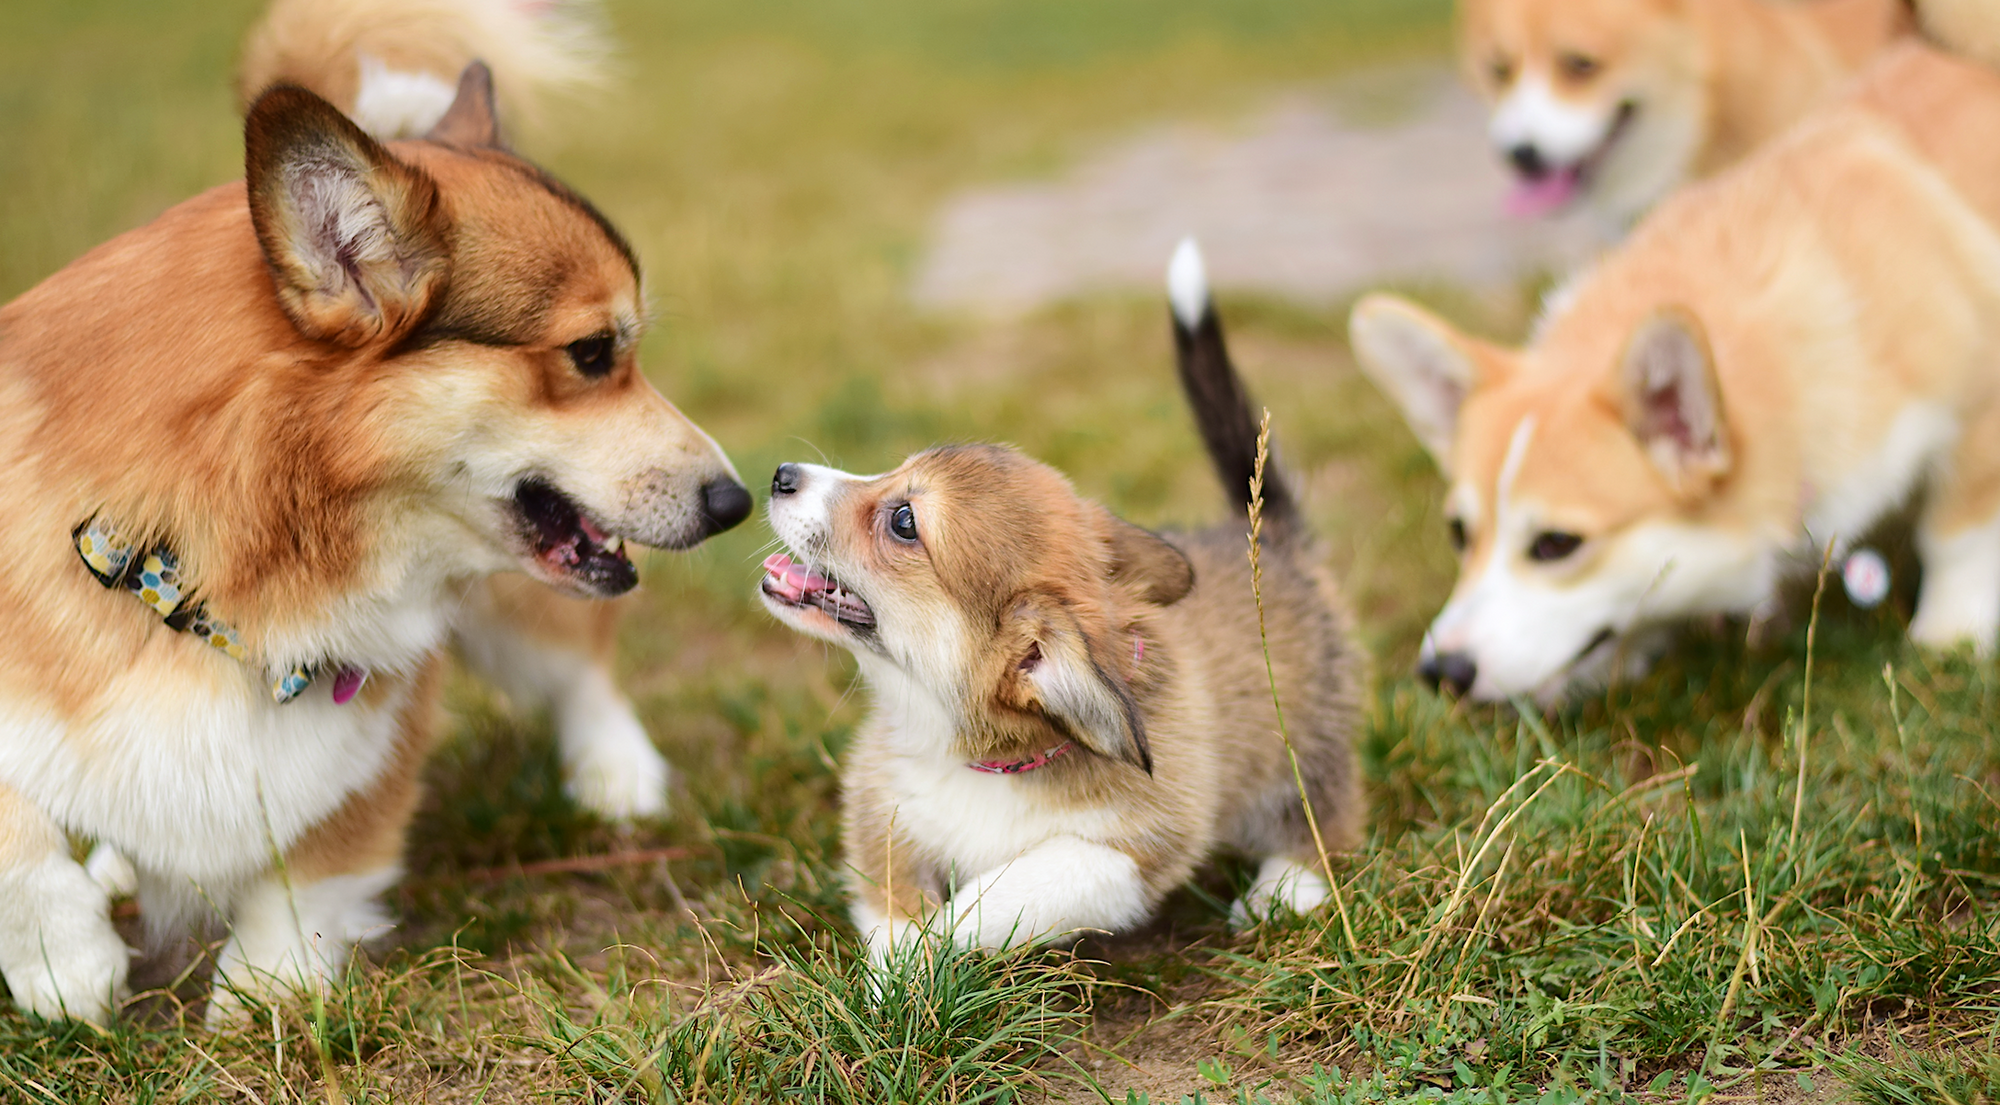 Tips for Safe and Fun Puppy Socialization